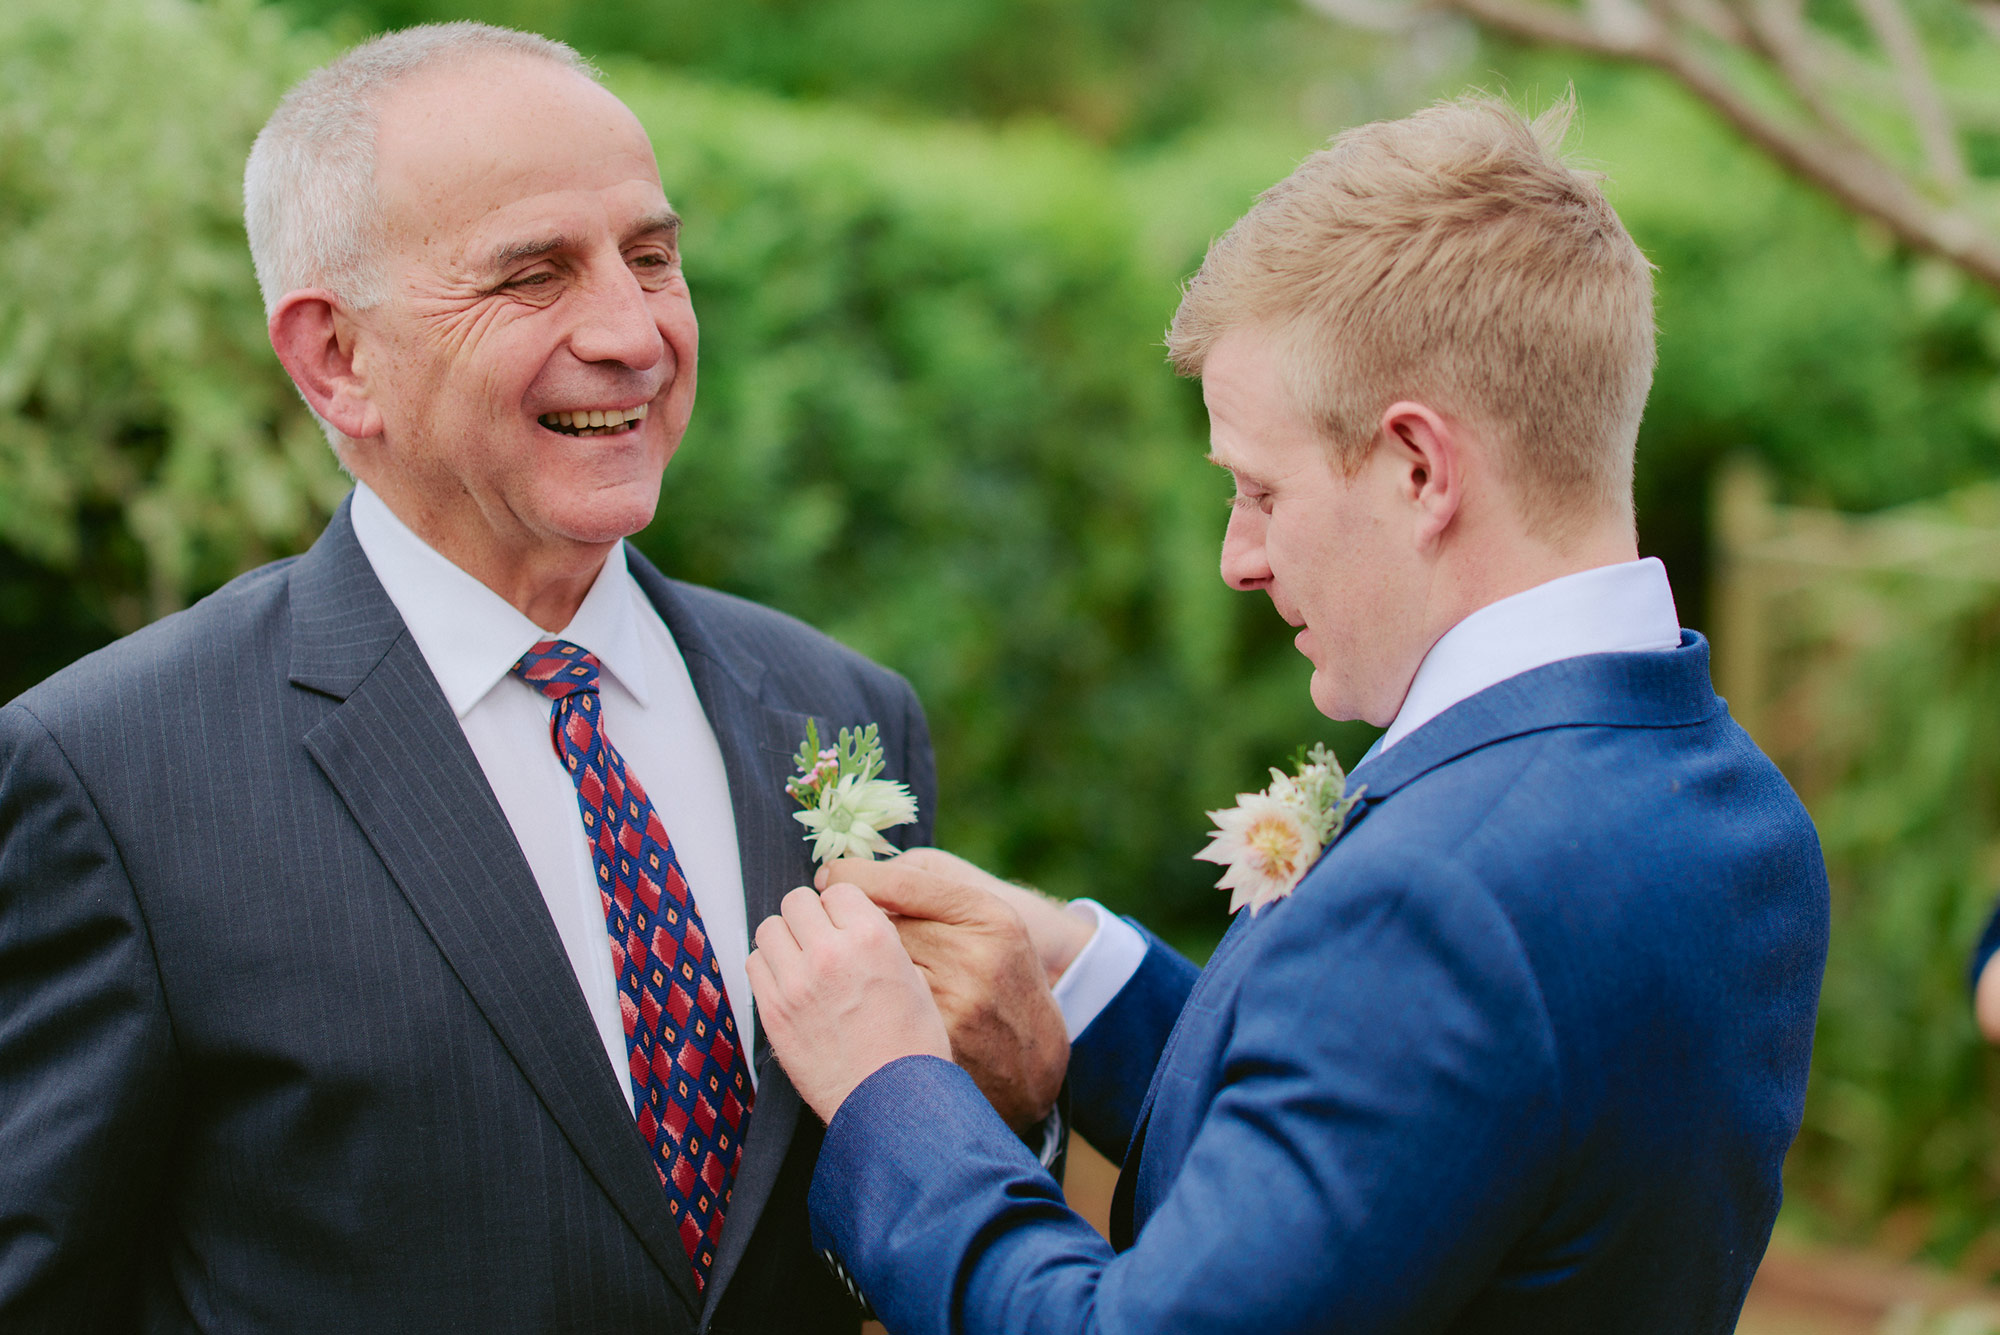 Helping his father put on his buttonhole